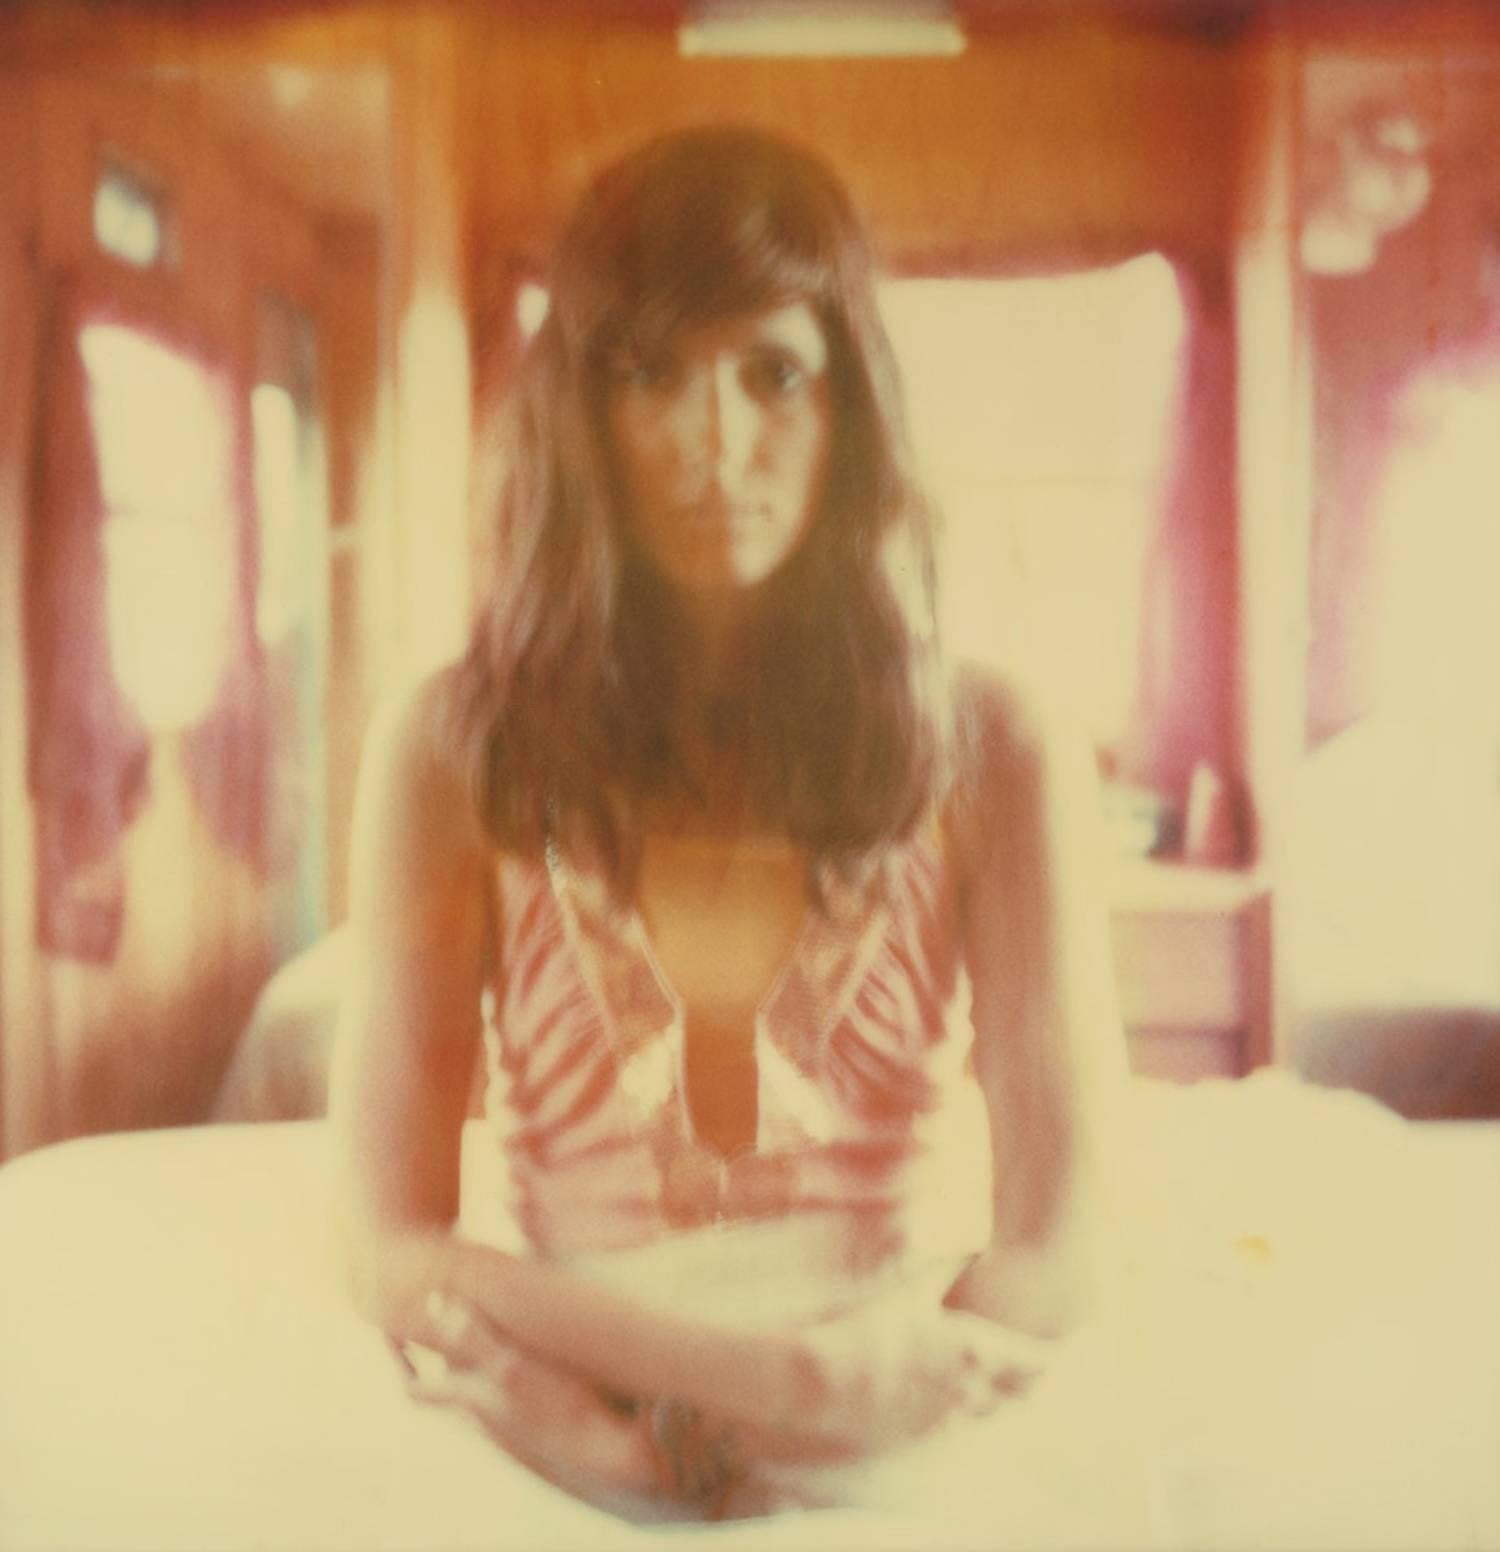 Gravity (The Girl behind the White Picket Fence) - Polaroid, Contemporary, Color - Photograph by Stefanie Schneider